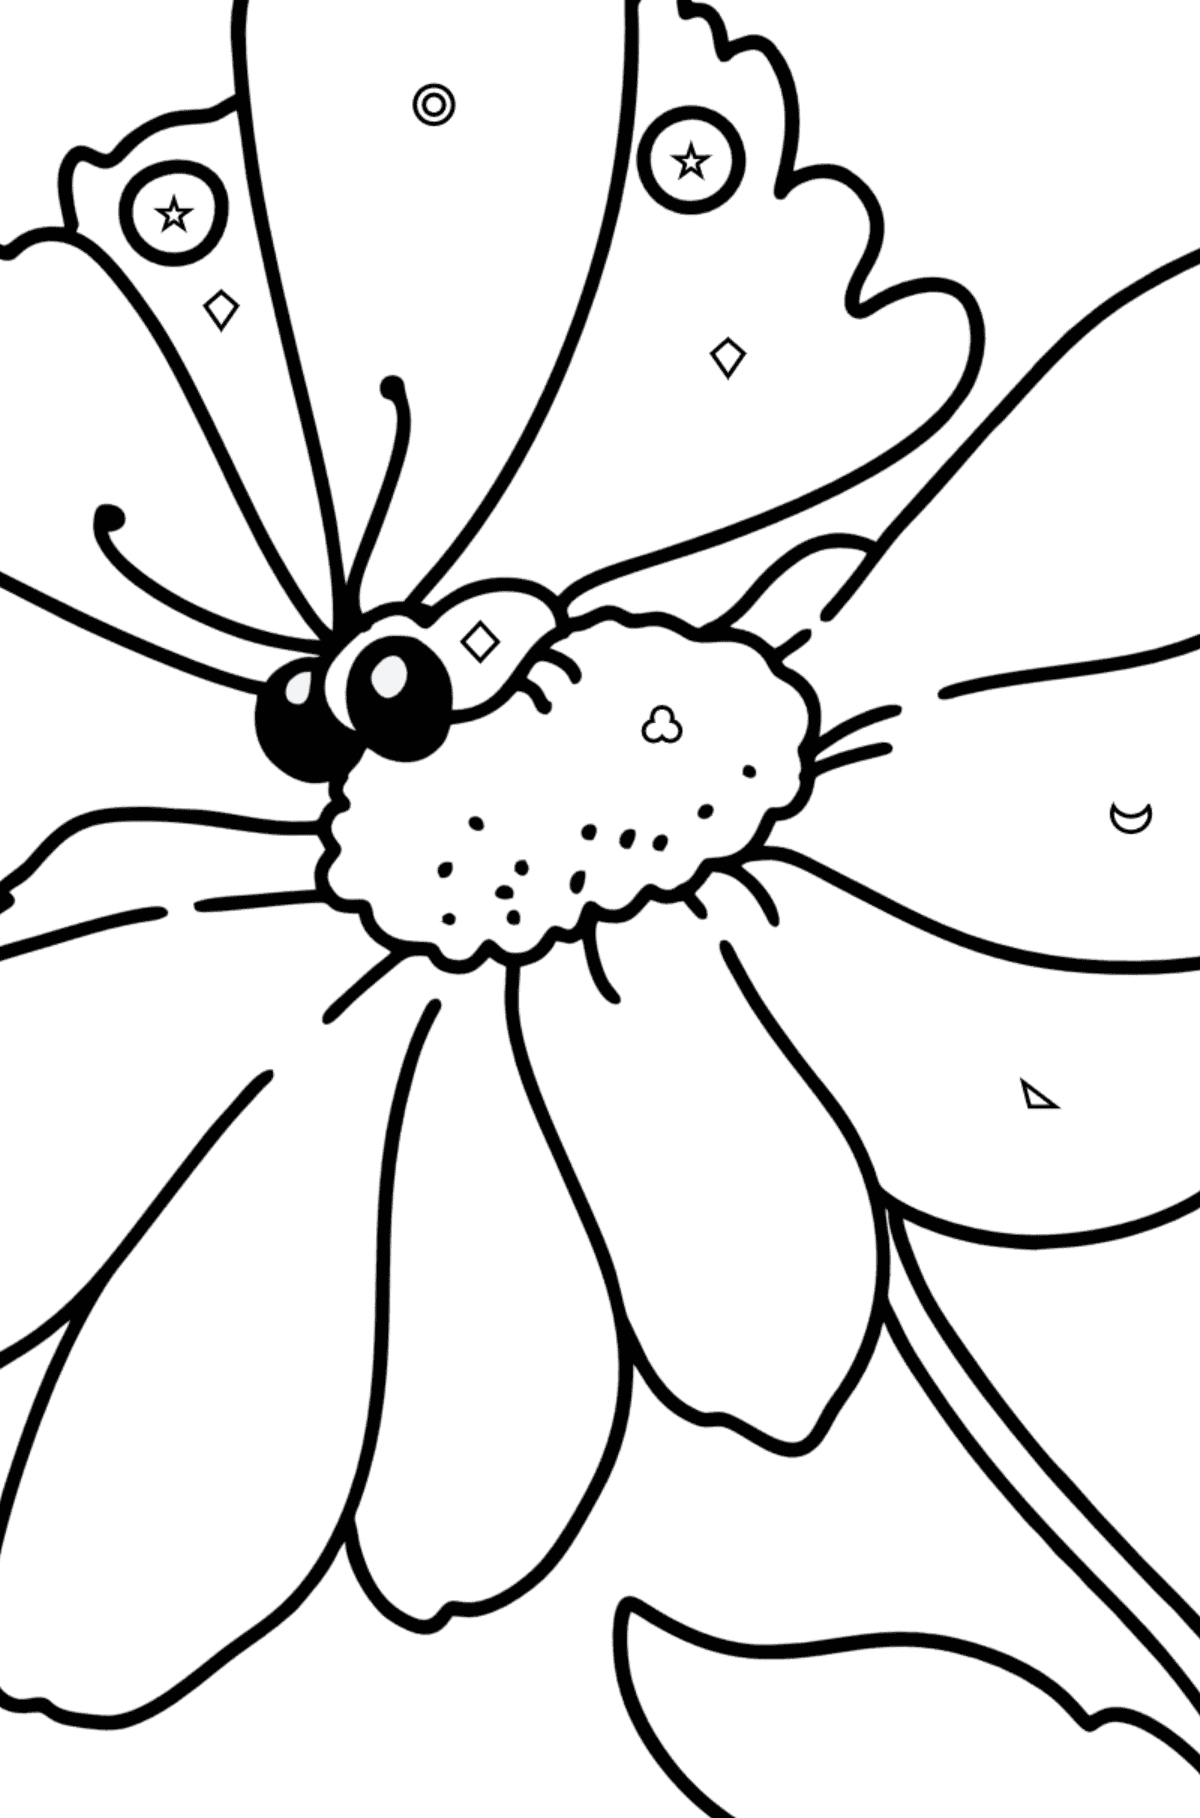 Summer Coloring page - Flowers and Butterfly - Coloring by Geometric Shapes for Kids